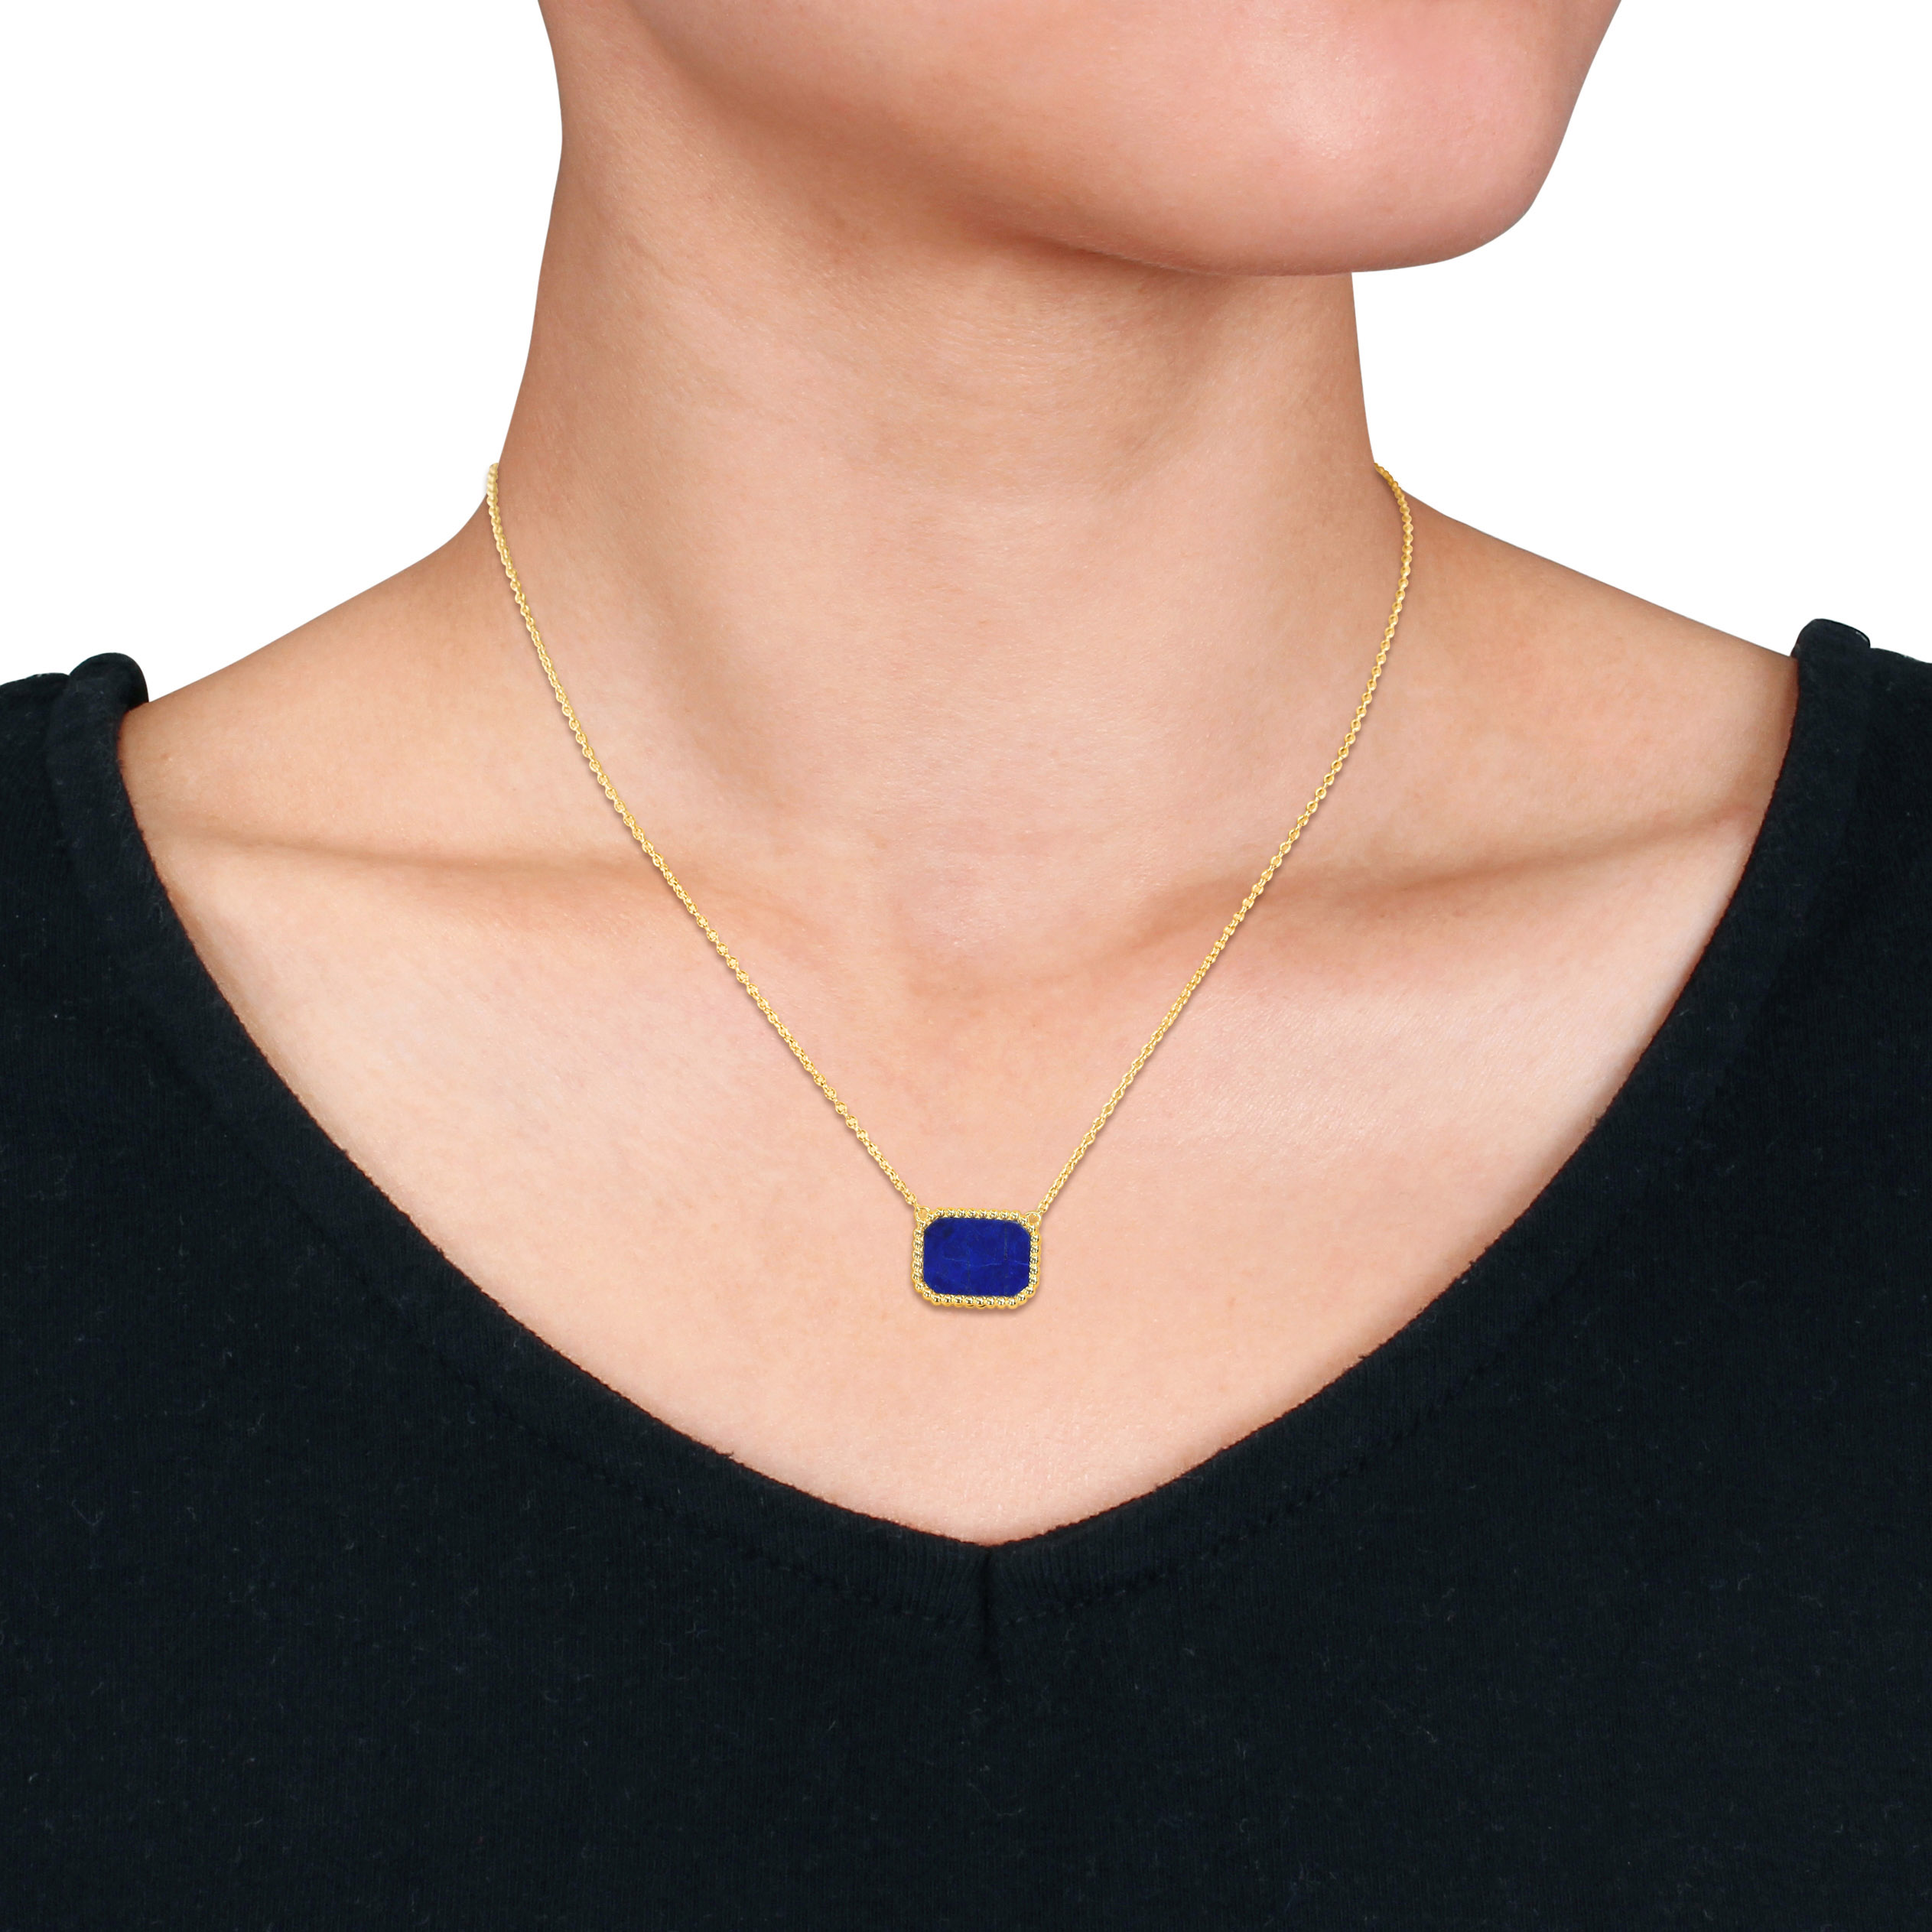 5 CT TGW Octagon Shape Lapis Necklace With Beaded Halo in Yellow Plated Sterling Silver - 17 in.